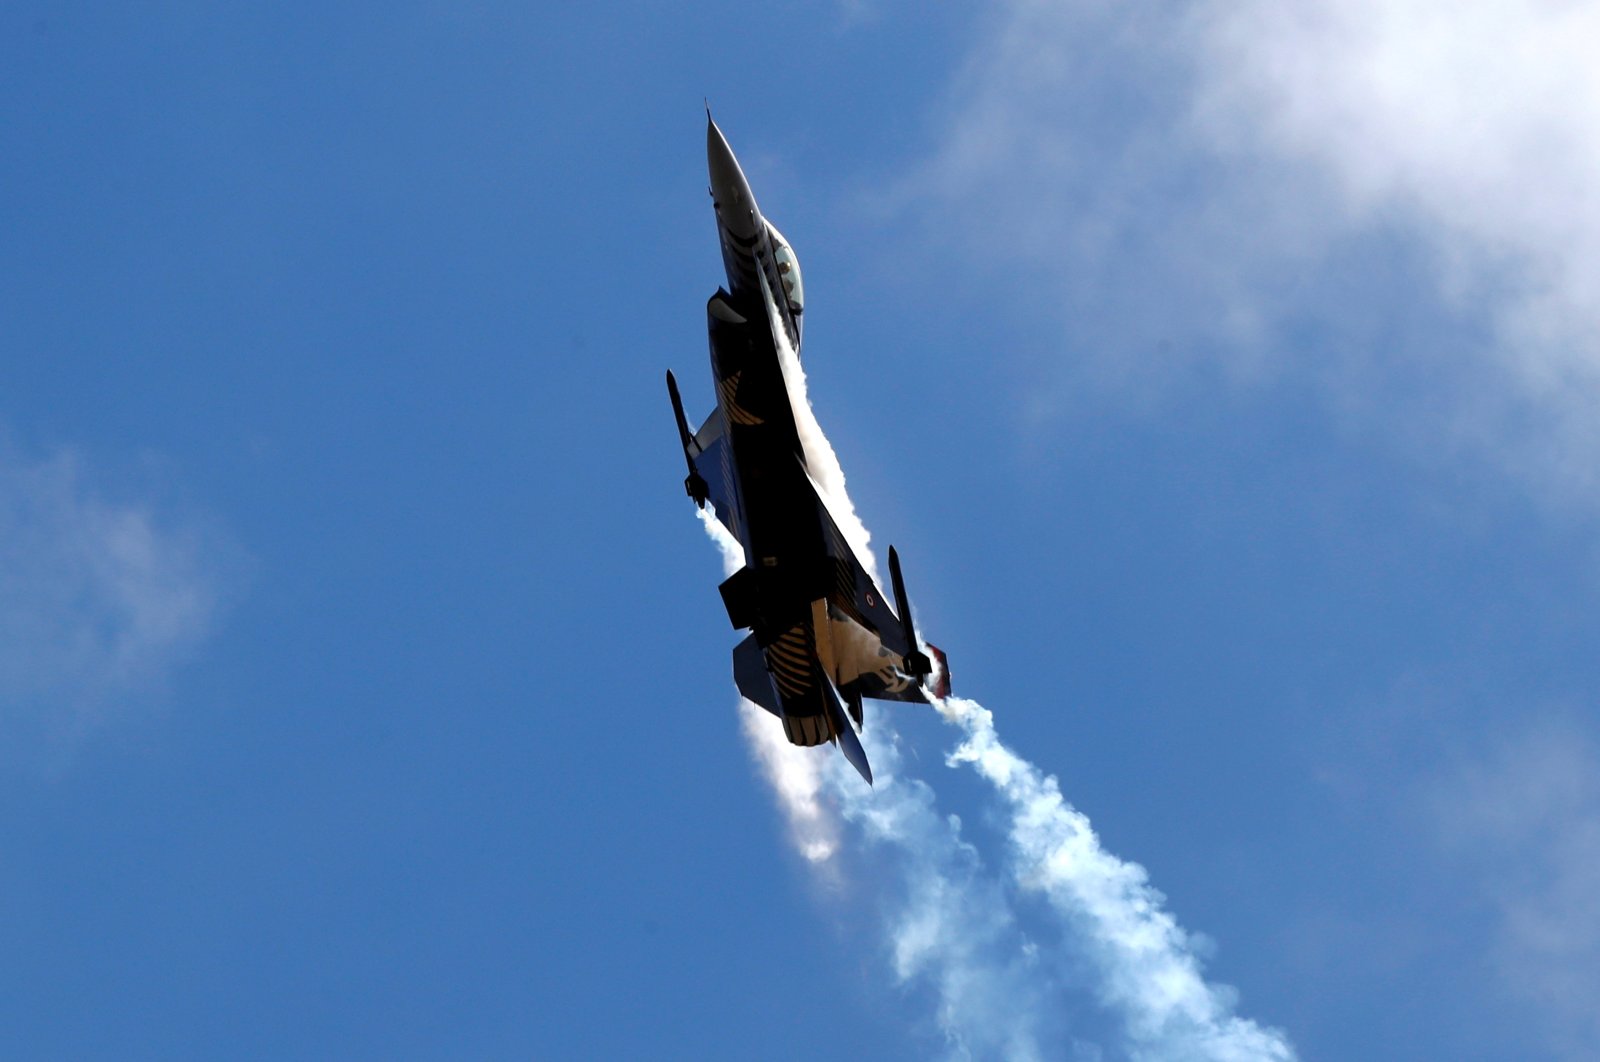 An F-16 aircraft of the Turkish Stars aerobatic team of the Turkish Air Force performs during the Teknofest airshow over the city's new airport that was under construction at the time, Istanbul, Turkey, Sept. 20, 2018. (Reuters Photo)